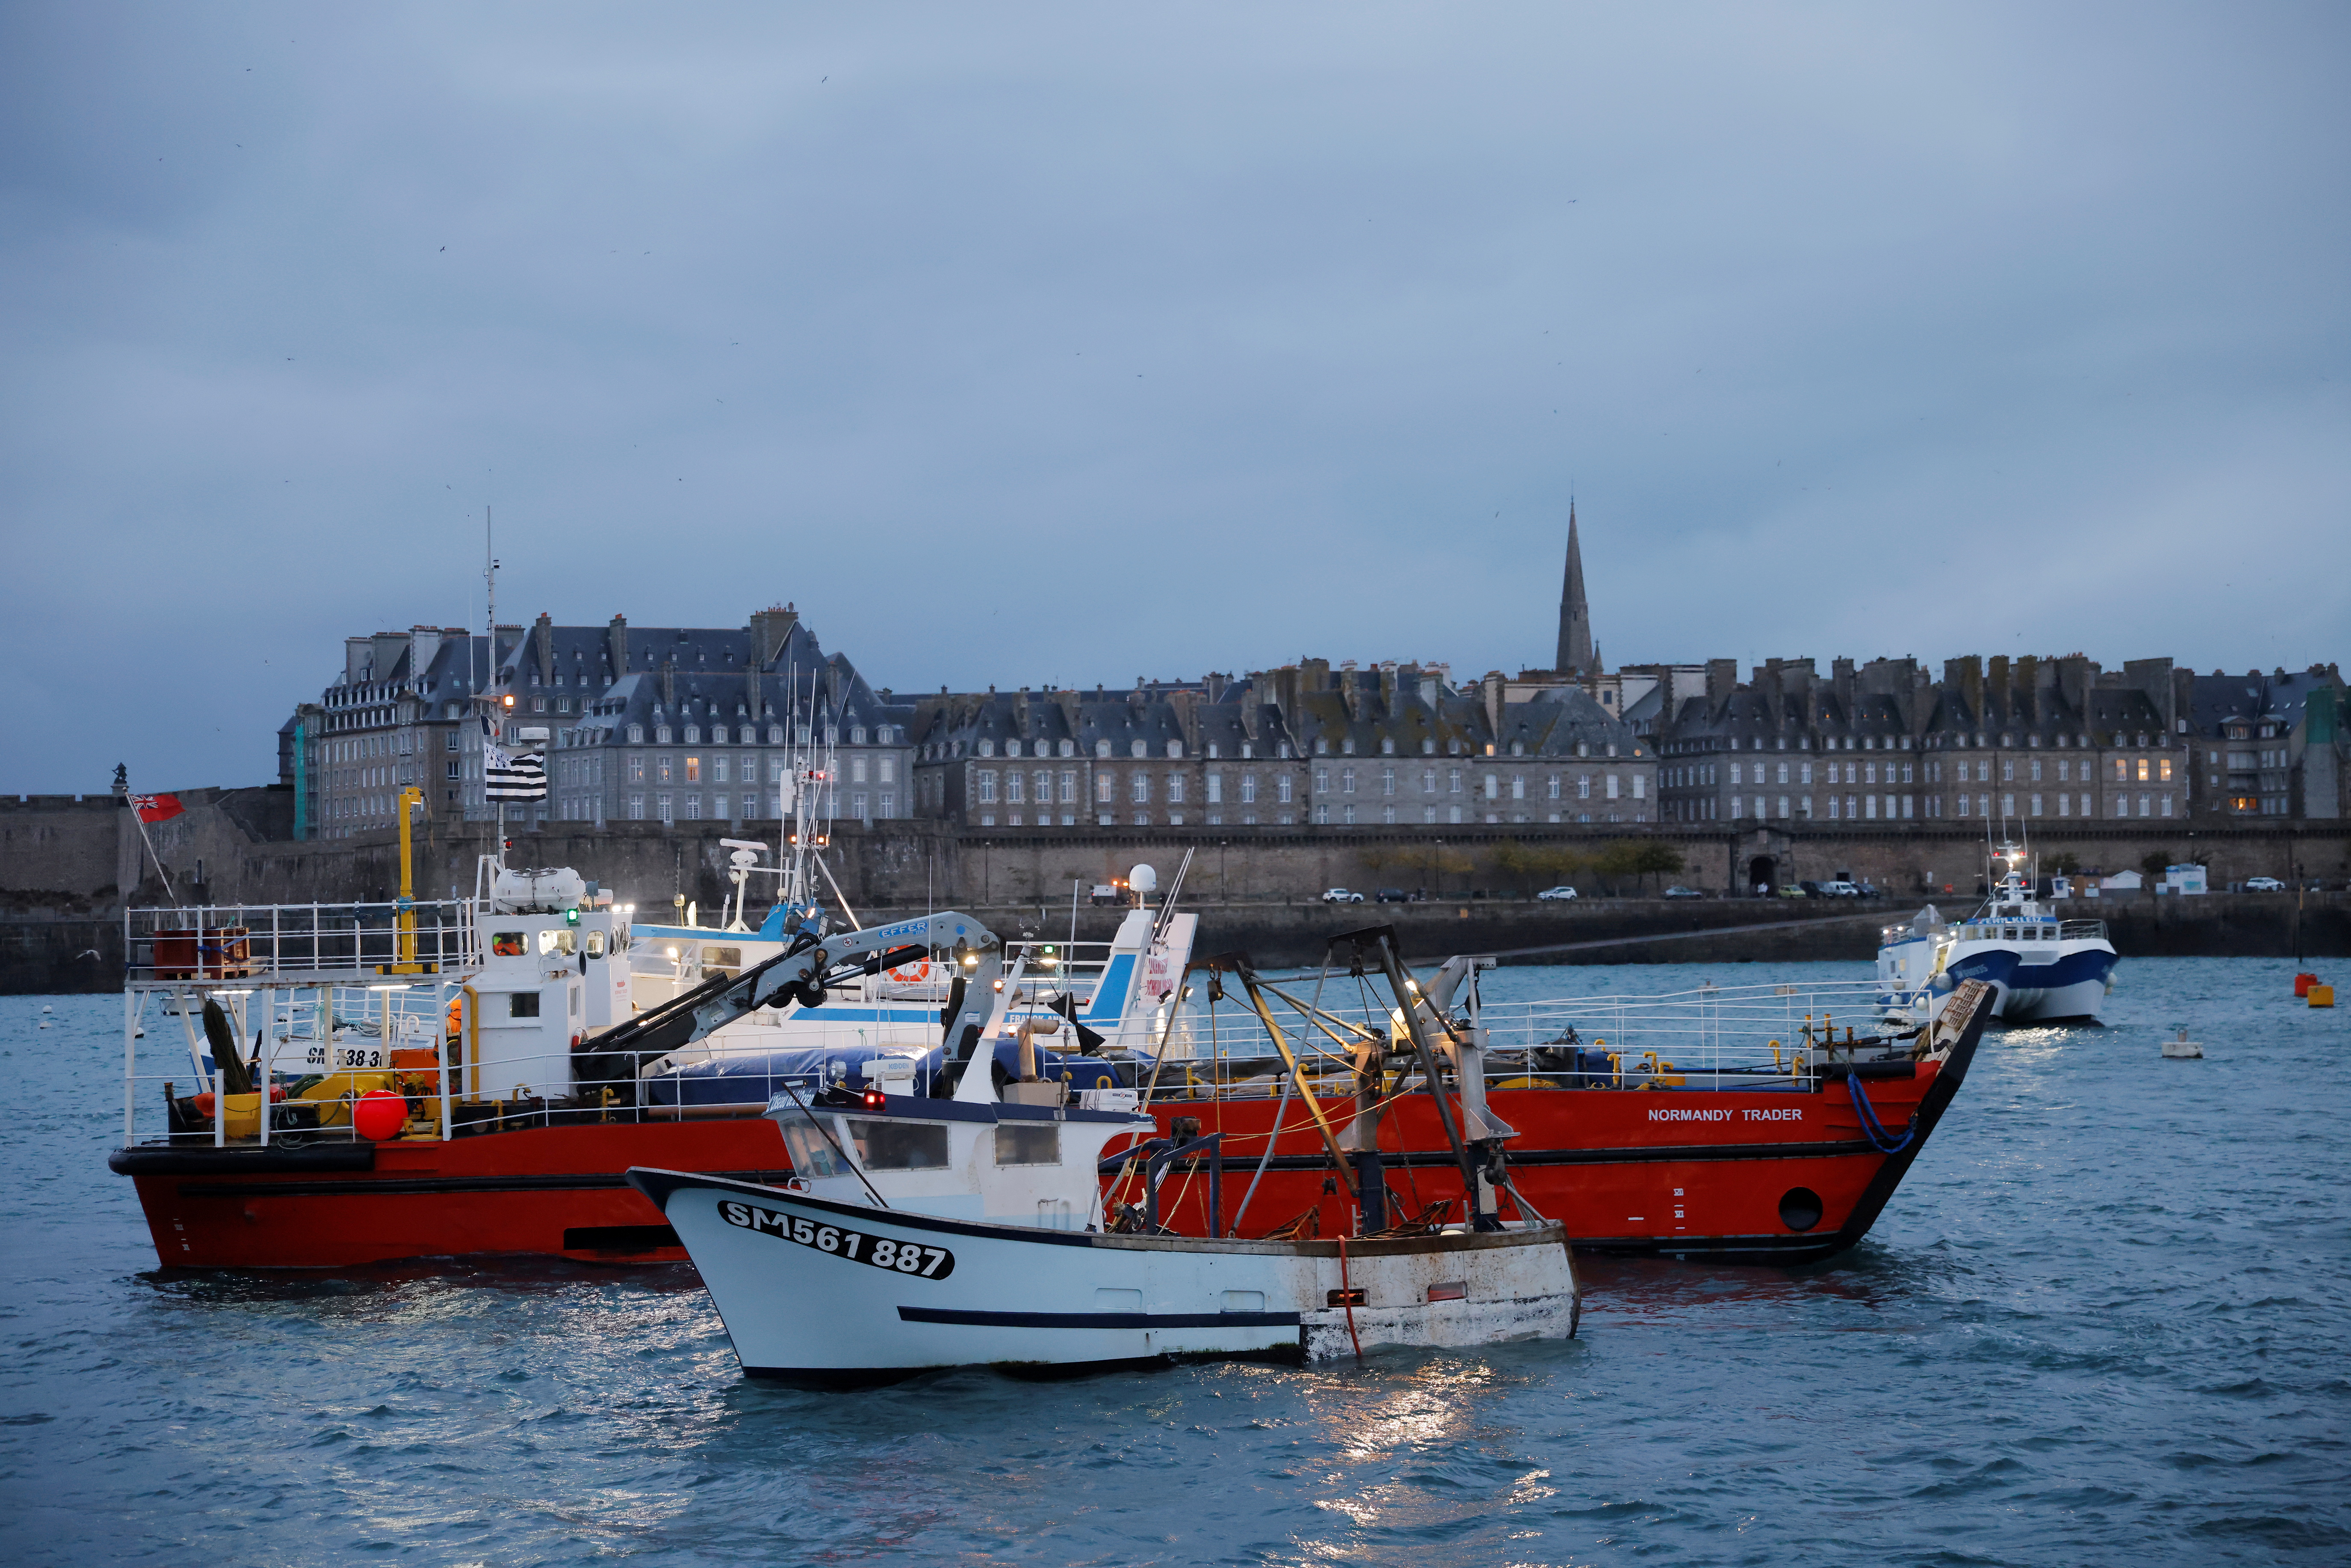 French fishermen block the 'Normandy Trader' boat at the entrance of the port of Saint-Malo as they started a day of protests to mark their anger over the issue of post-Brexit fishing licenses, in Saint-Malo, France, November 26, 2021. REUTERS/Stephane Mahe